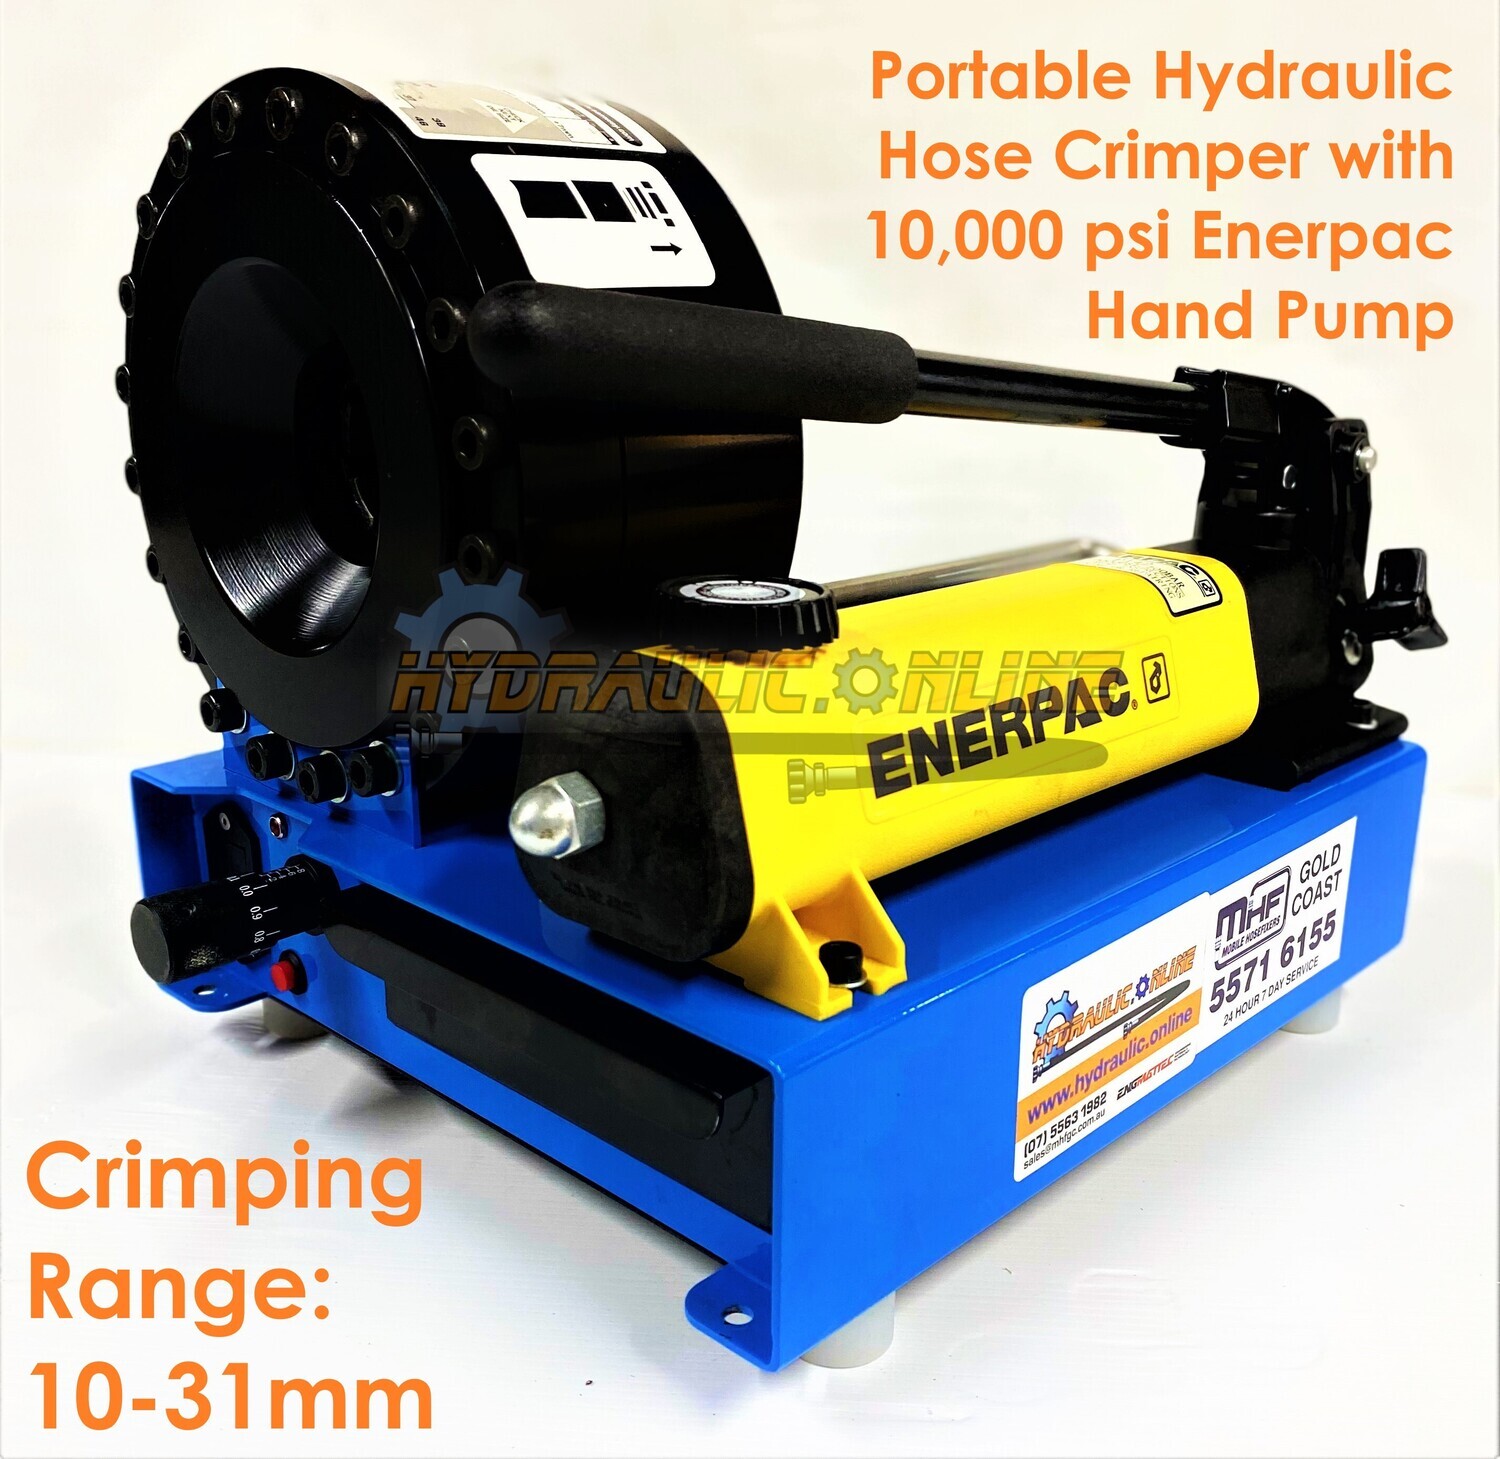 Enerpac Hand Operated Portable Hydraulic Hose Crimper 10-38 mm Swaging Range